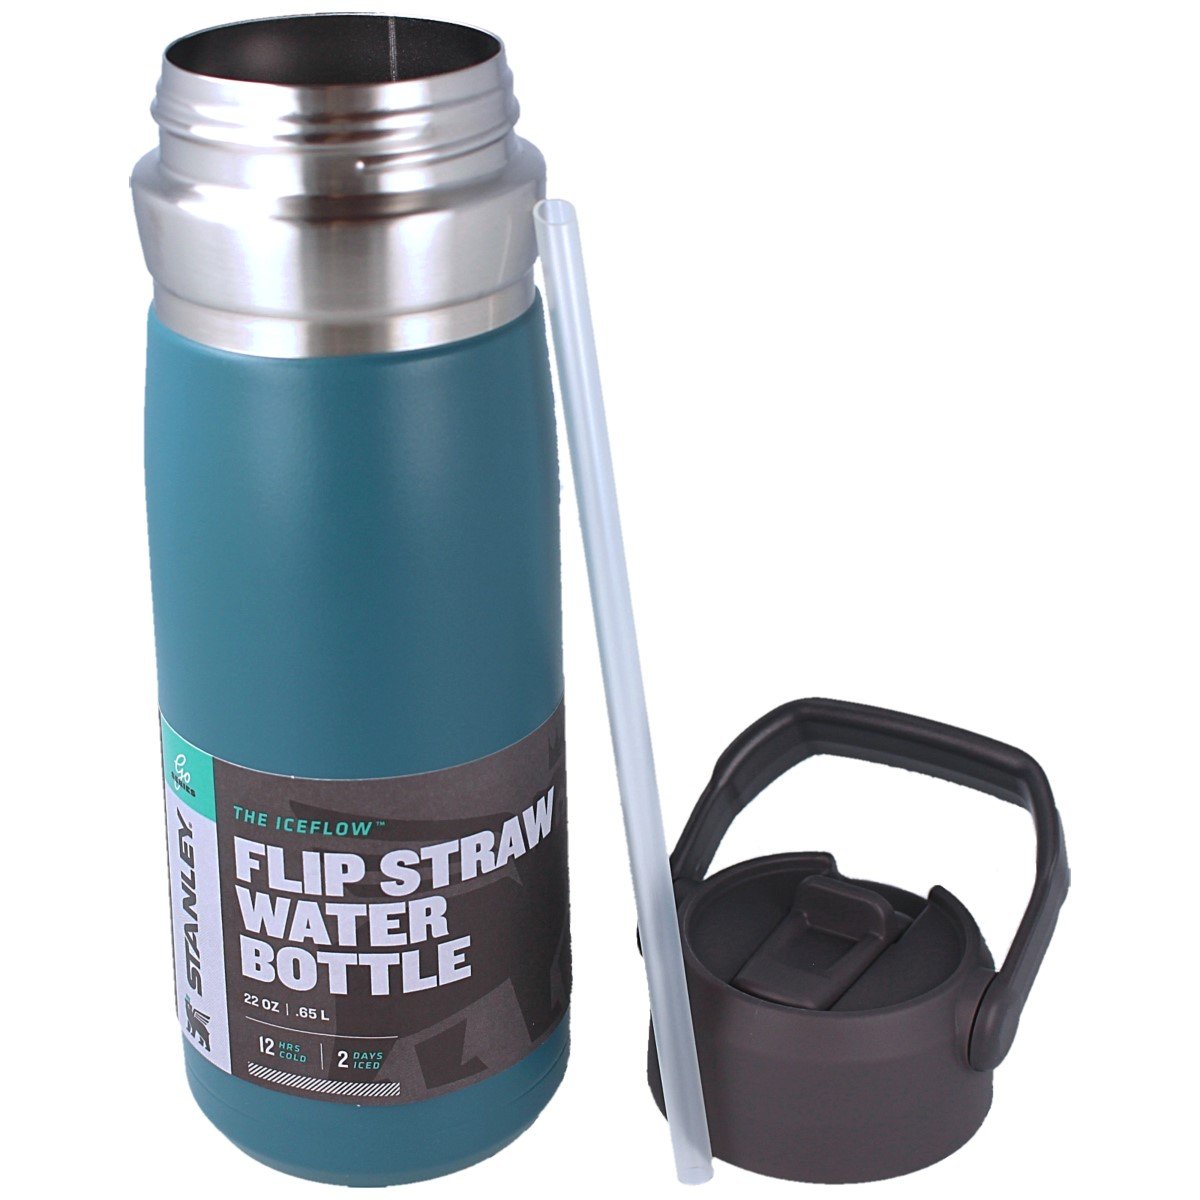 https://sharg.pl/eng_pl_Stanley-Go-IceFlow-Water-Bottle-with-Straw-22oz-65L-Lagoon-10-09697-009-115473_1.jpg